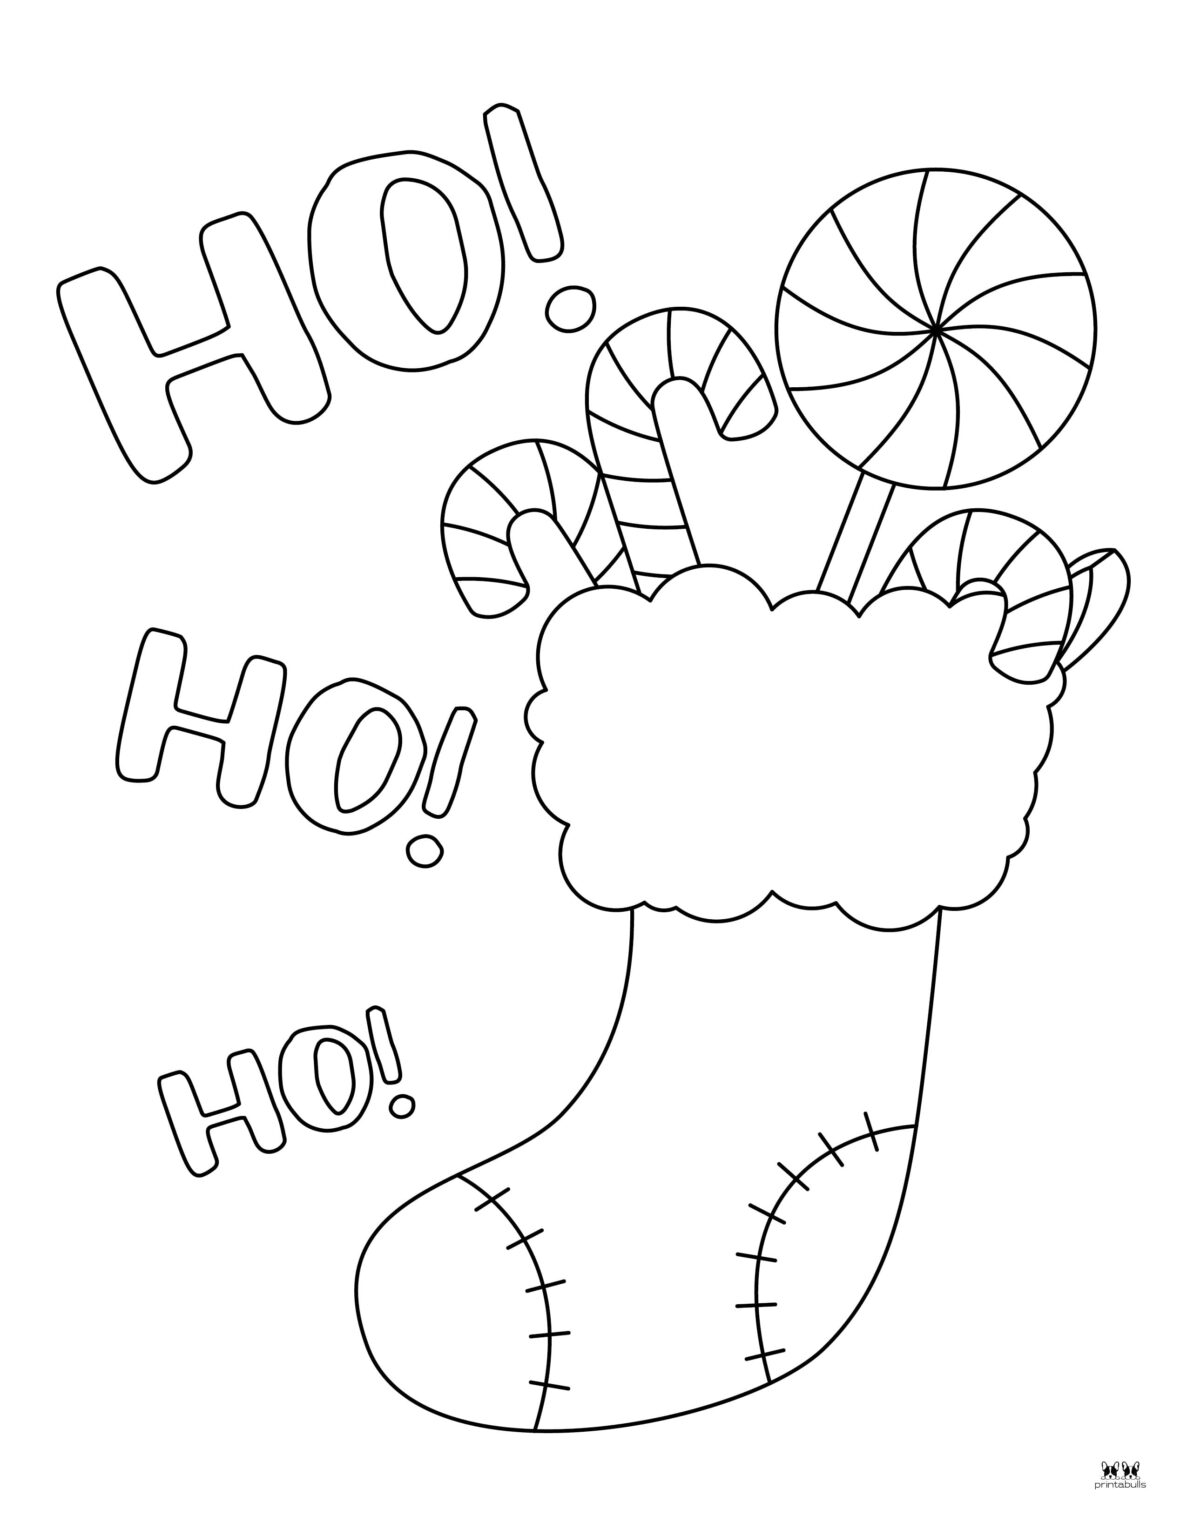 Candy Cane Coloring Pages And Templates 35 Pages Printabulls 